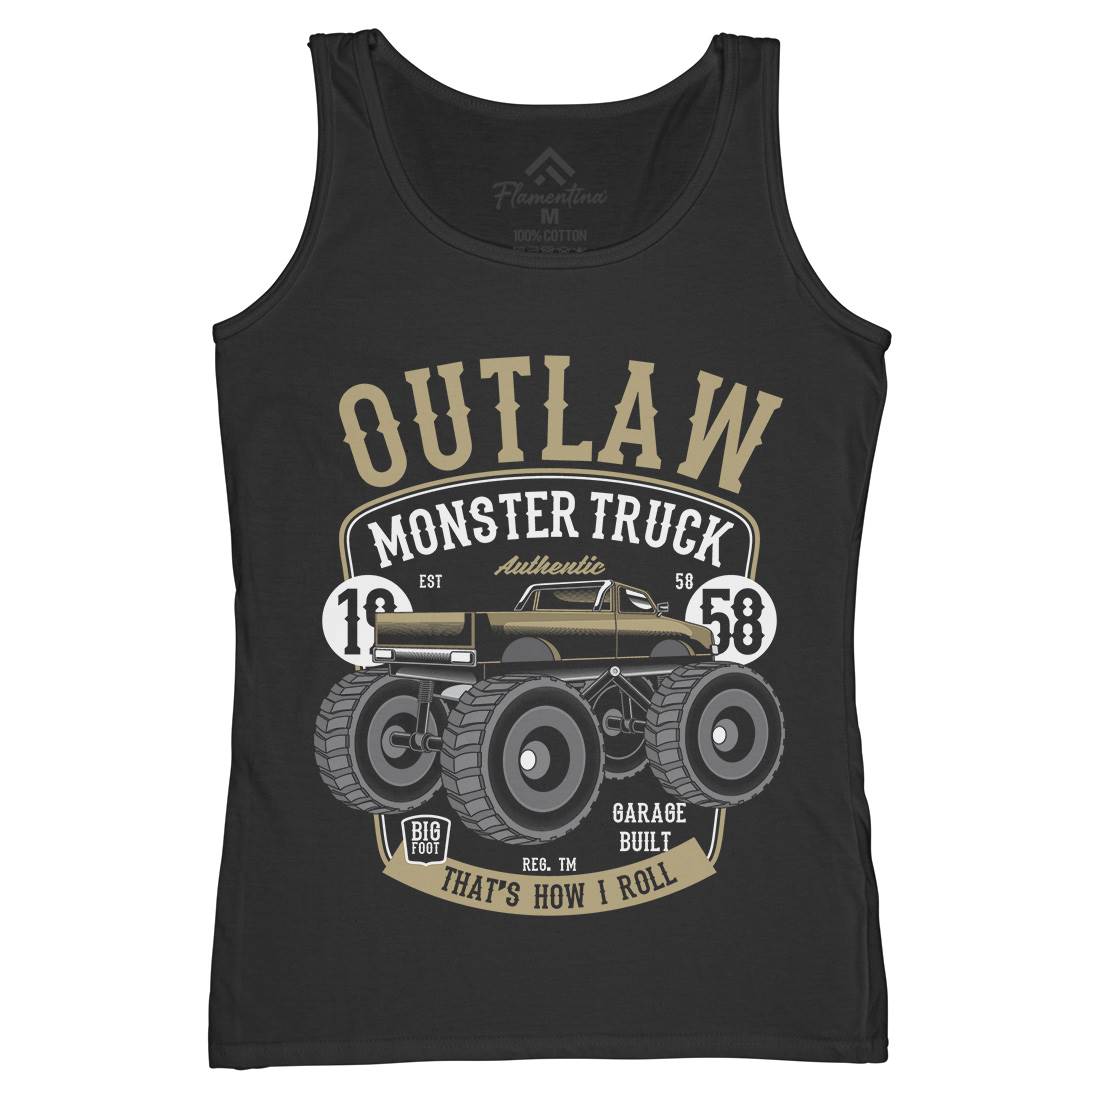 Outlaw Monster Truck Womens Organic Tank Top Vest Vehicles C408